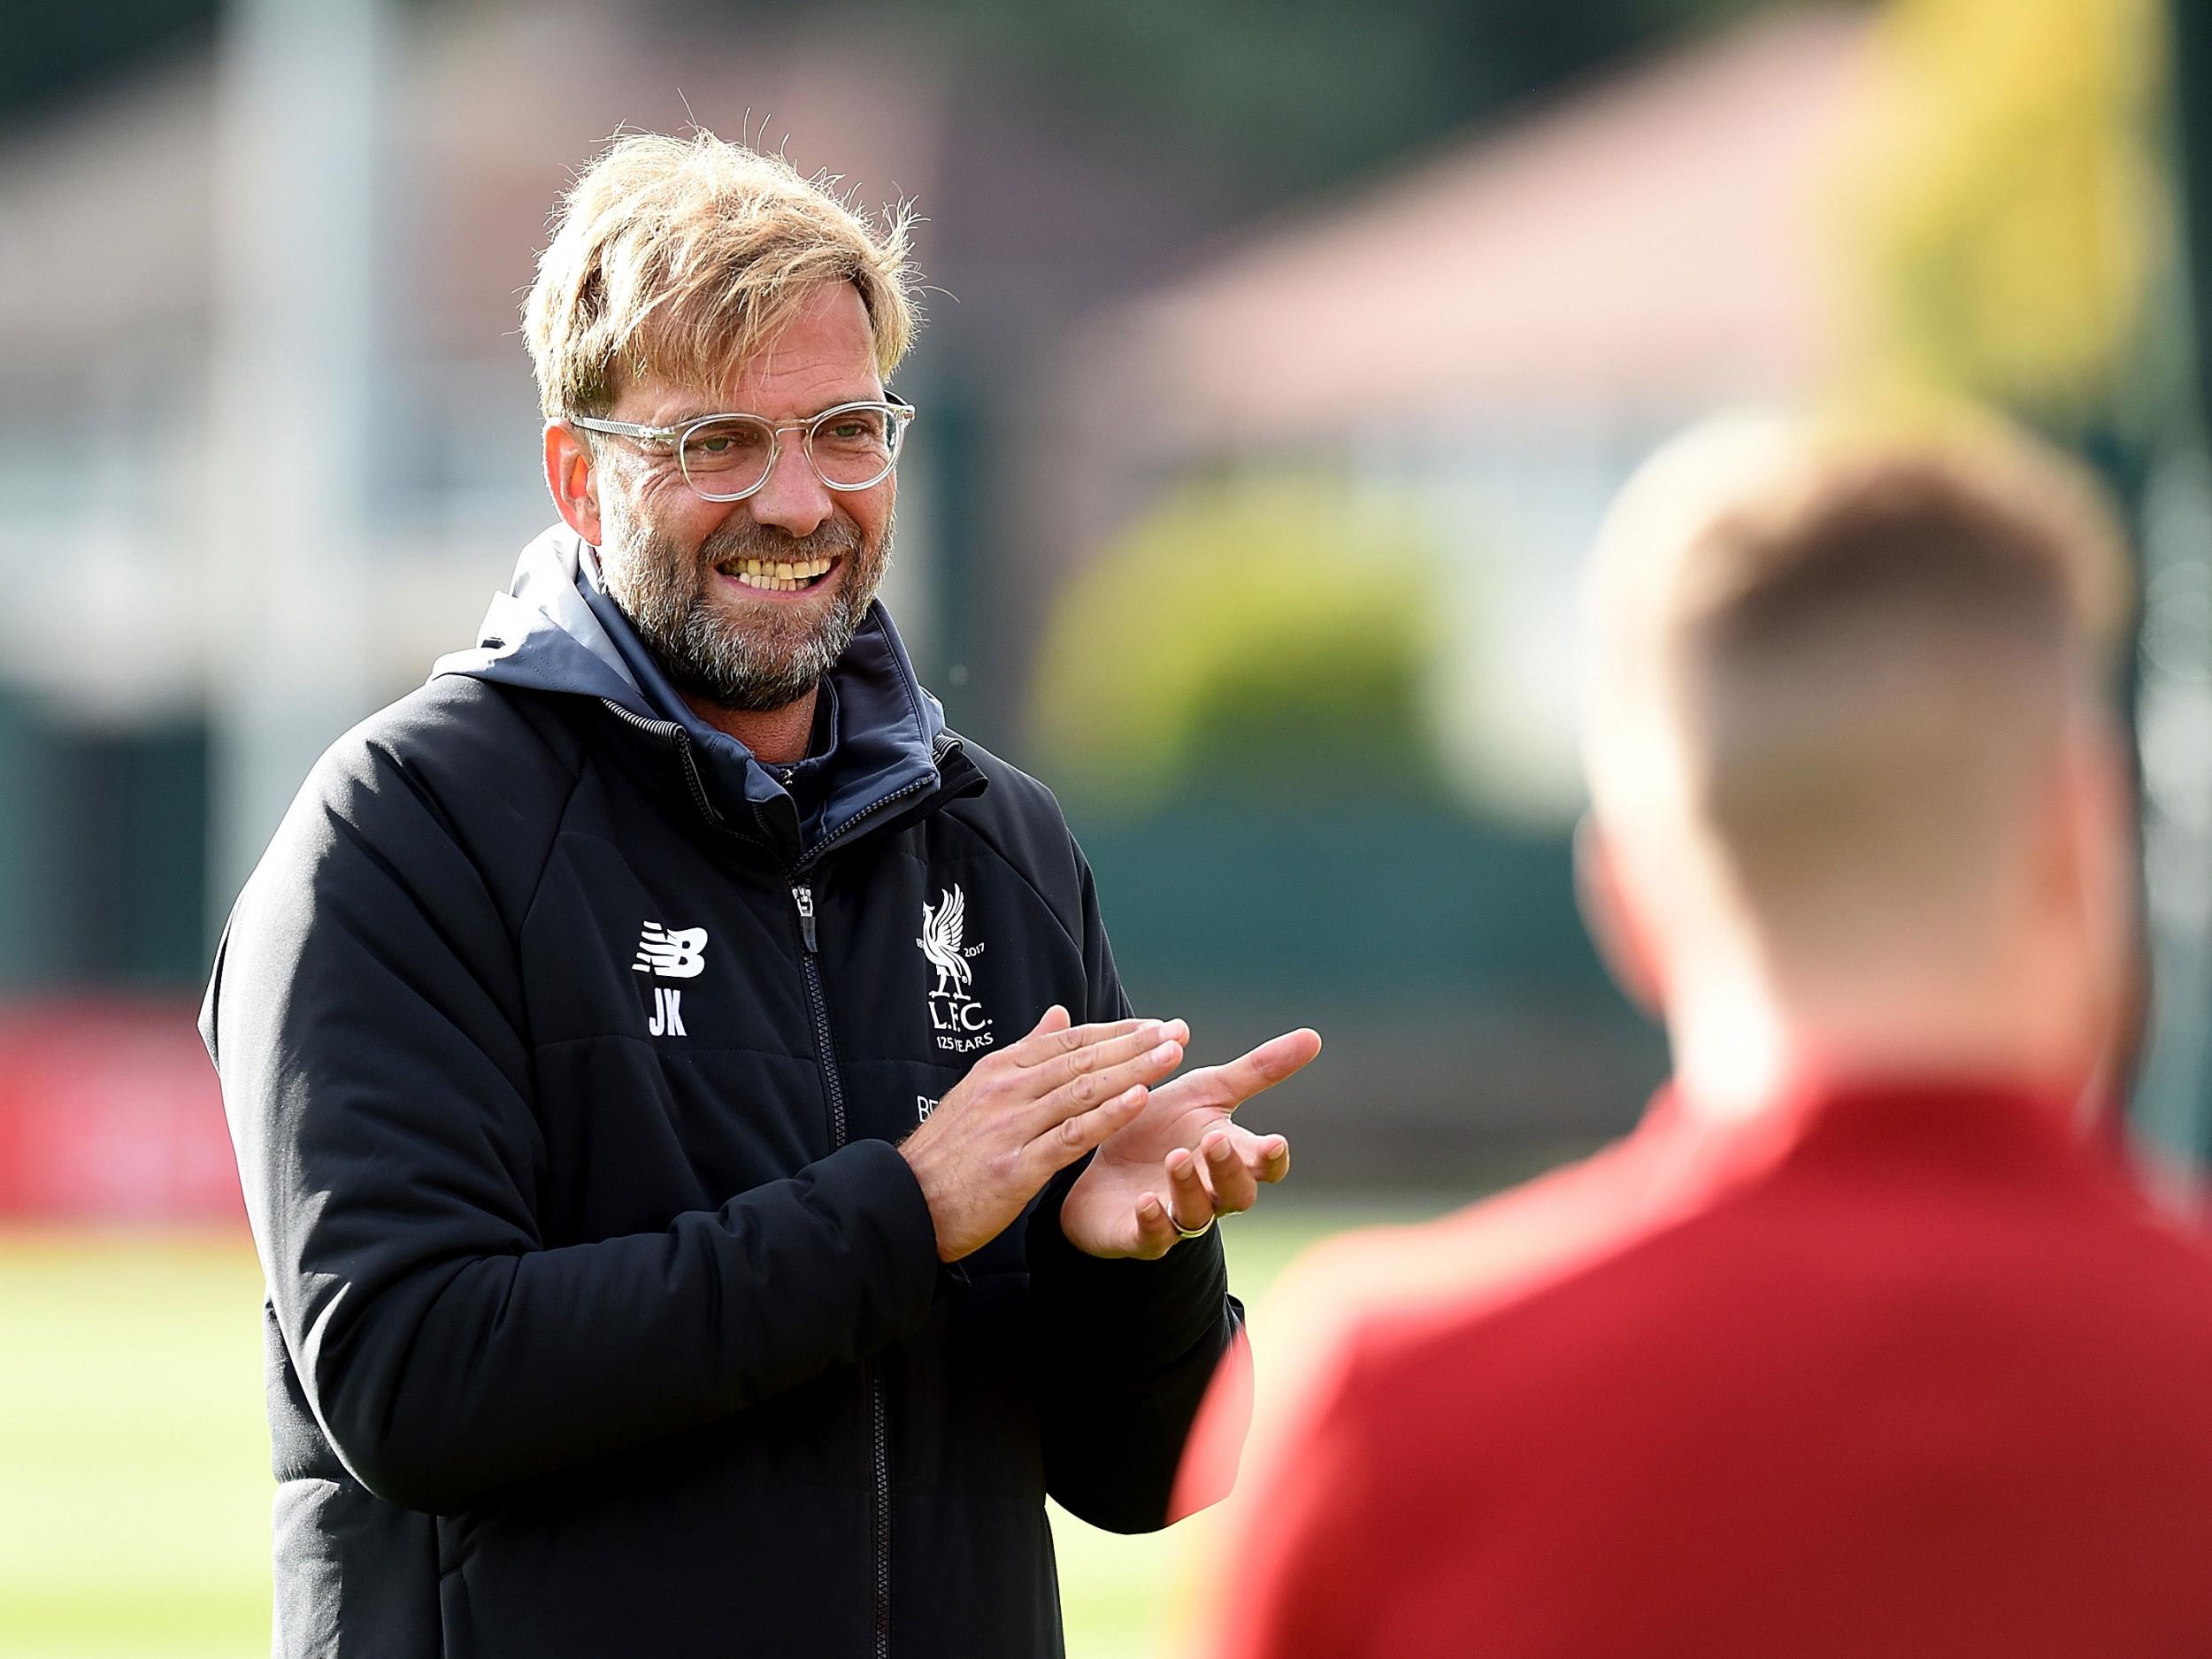 A win would be a major shot in the arm for Jurgen Klopp's Liverpool